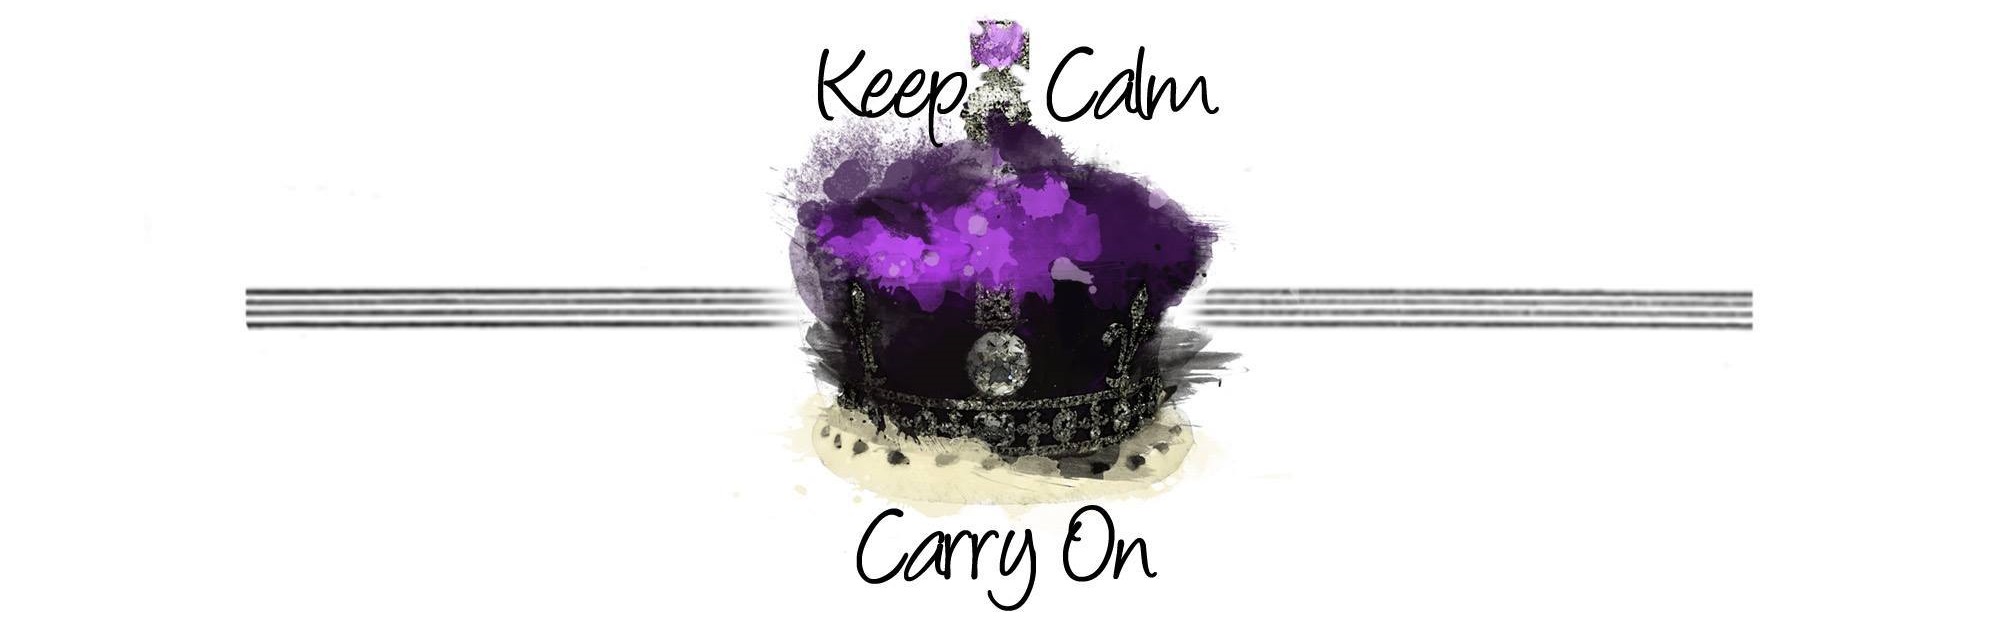 Keep calm and carry on